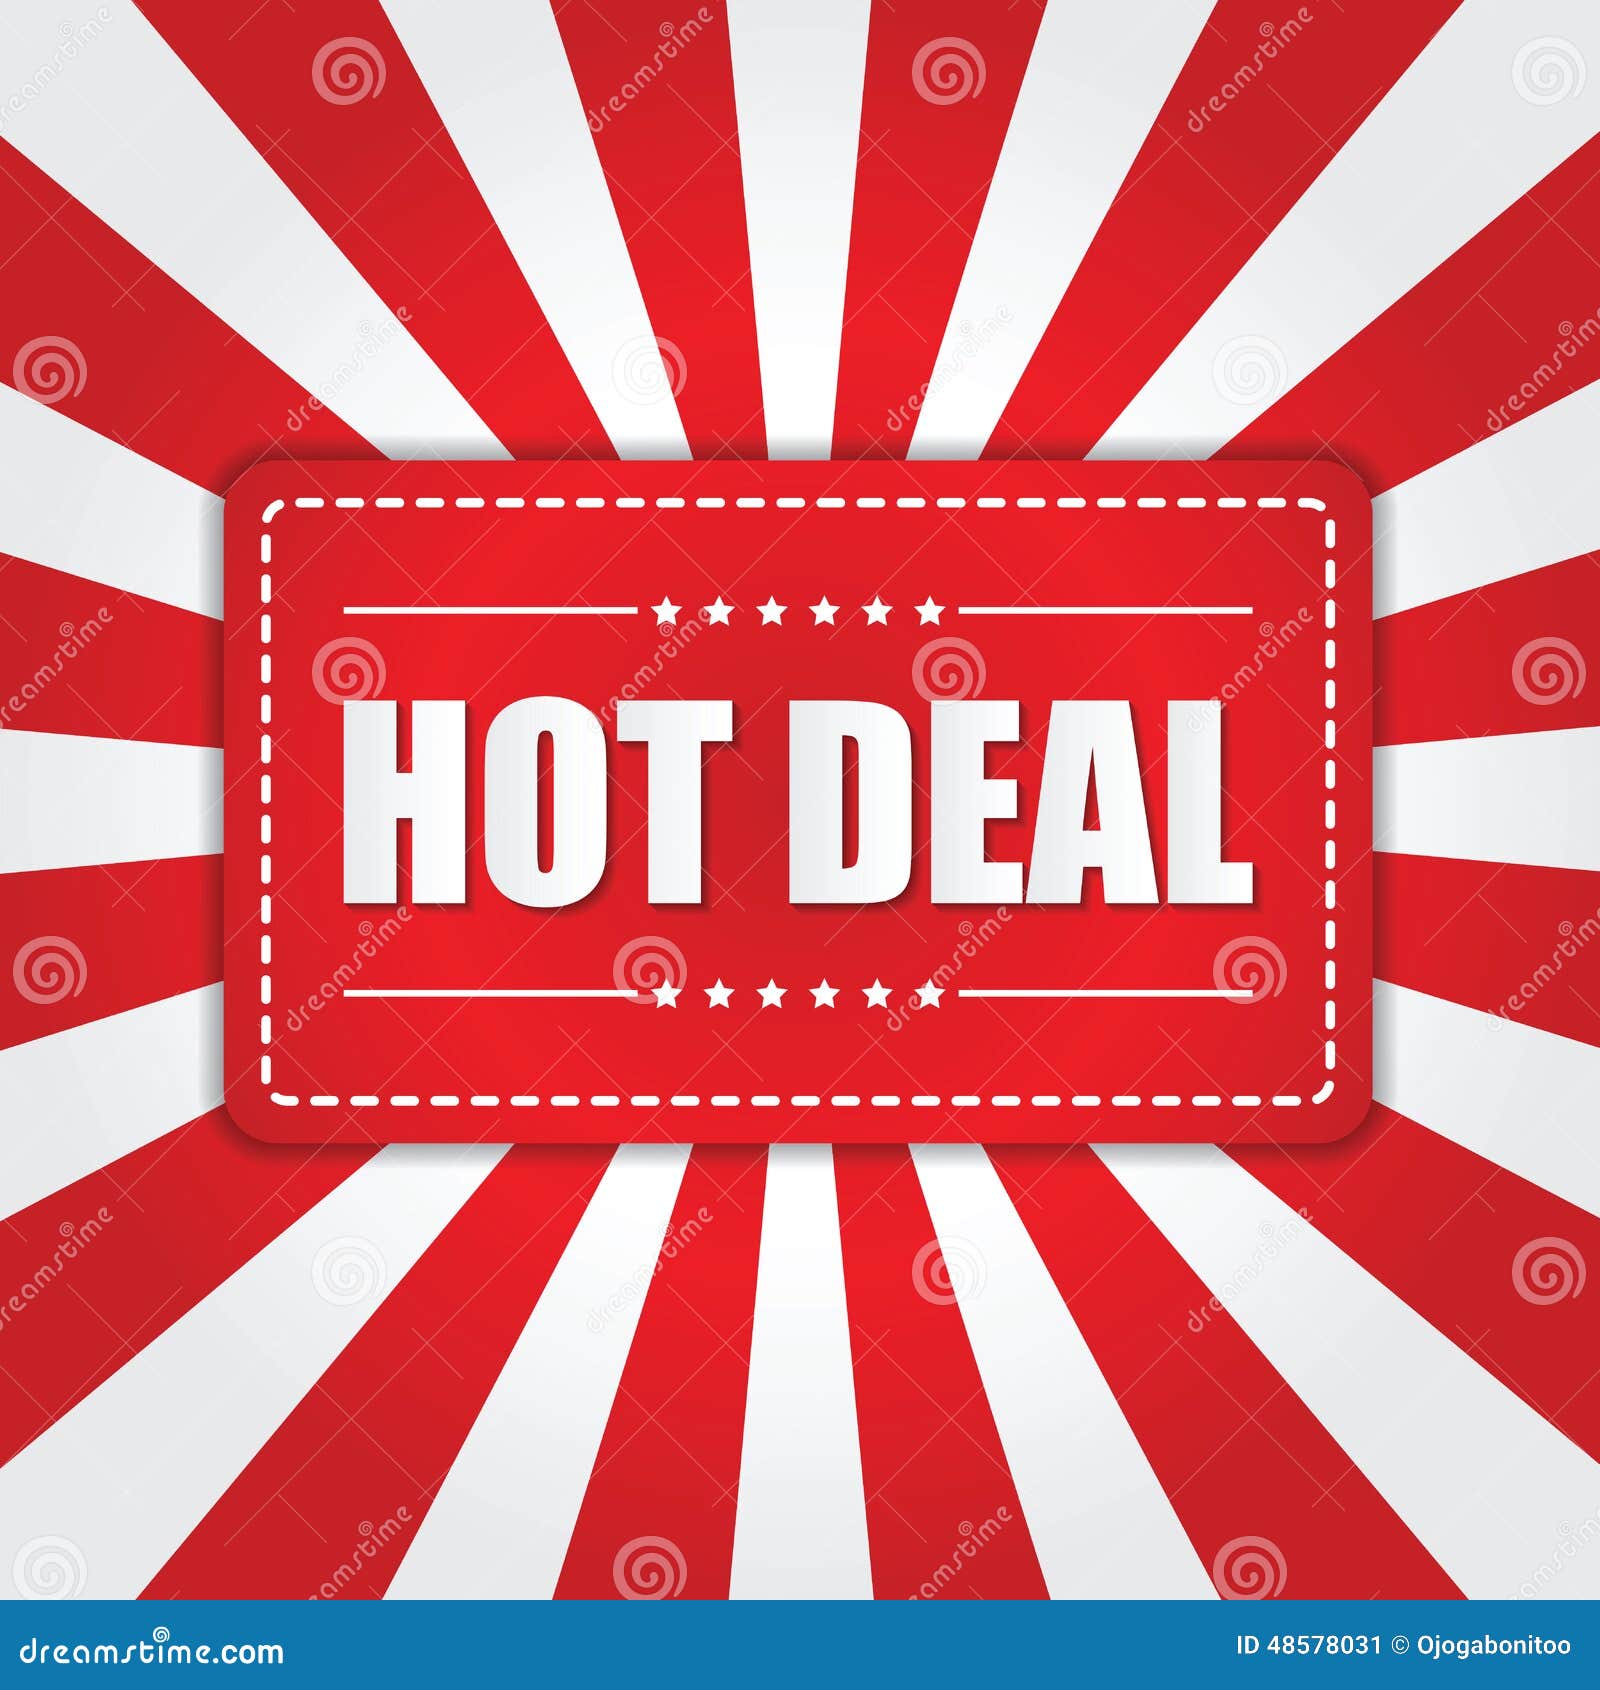 hot deal banner with sunburst effect on white and red background